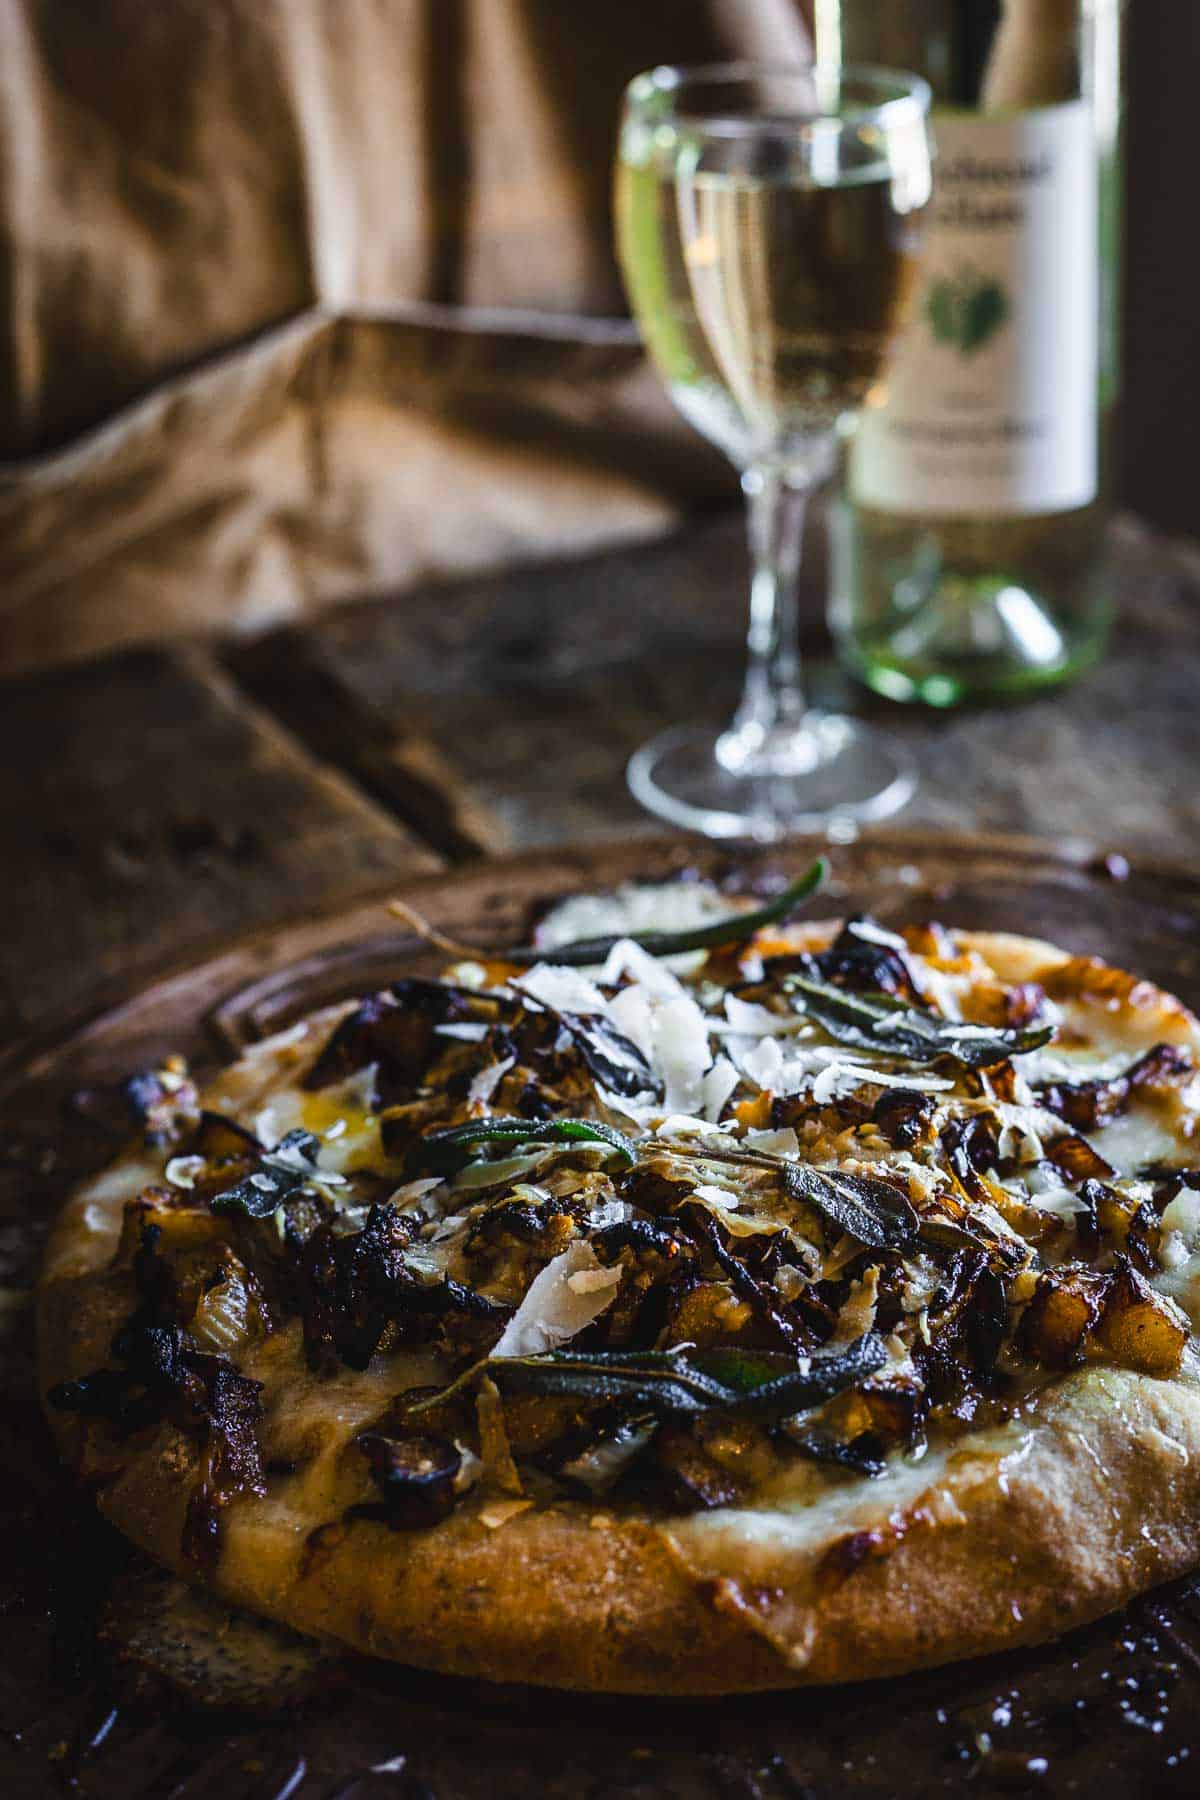 A pizza topped with garlic is sitting on a table next to a glass of wine.